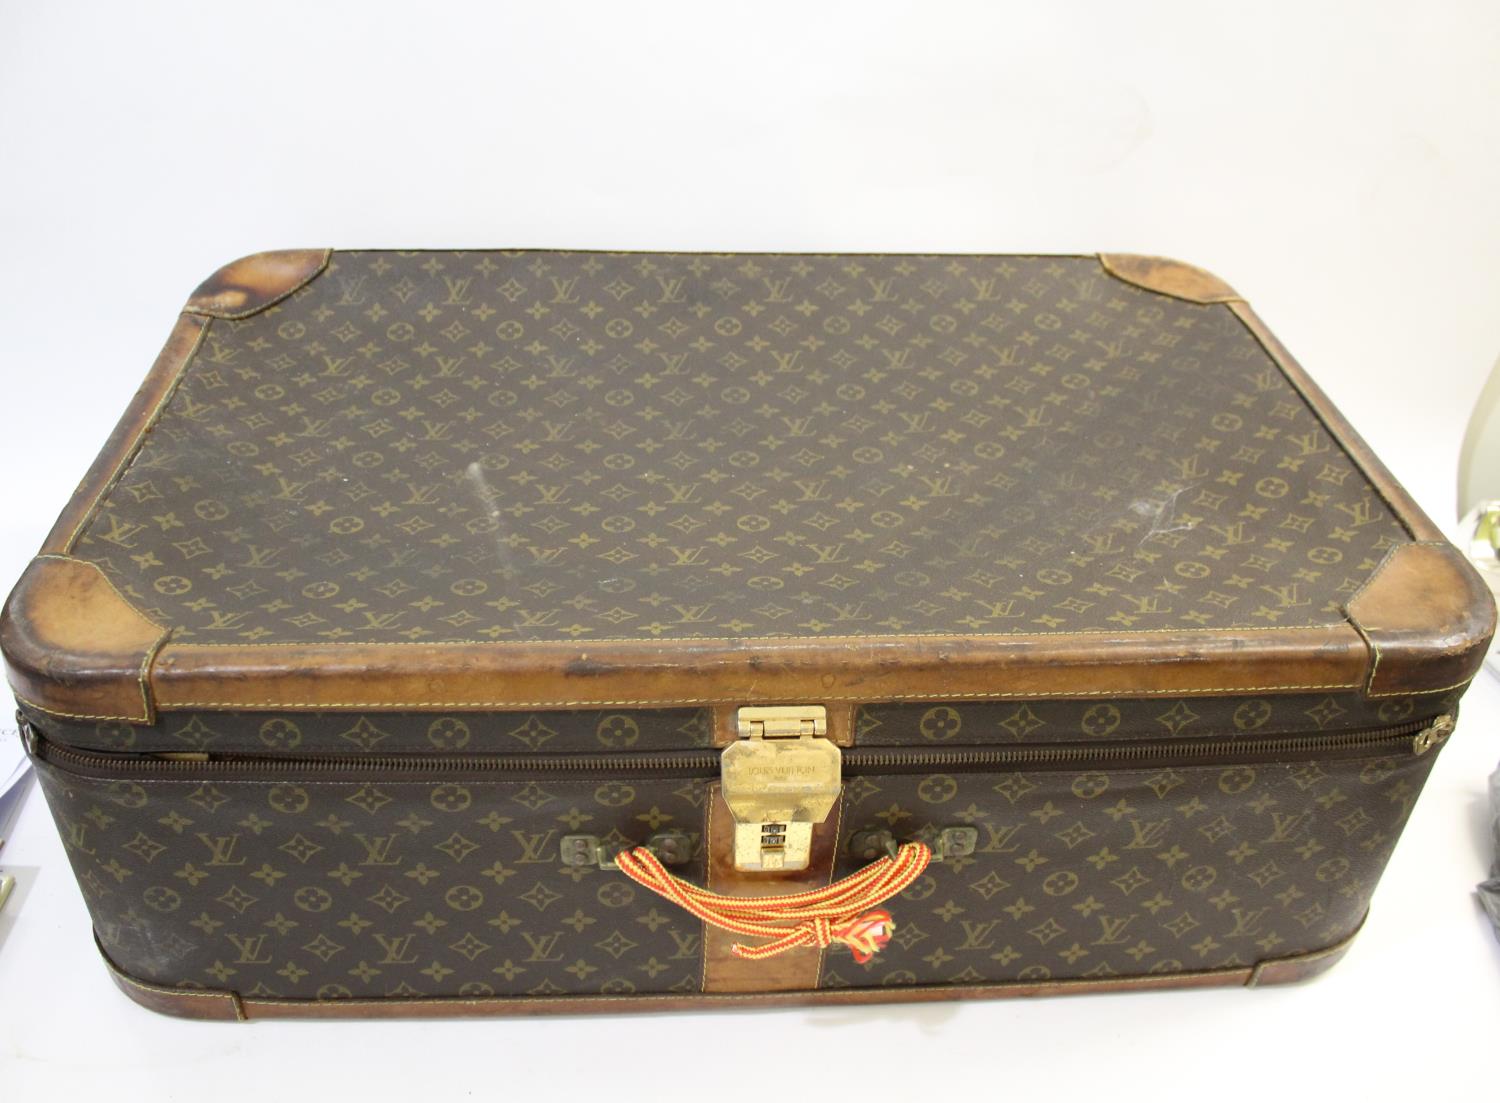 MODERN LOUIS VUITTON SUITCASE with a monogrammed exterior and leather trim, with a combination